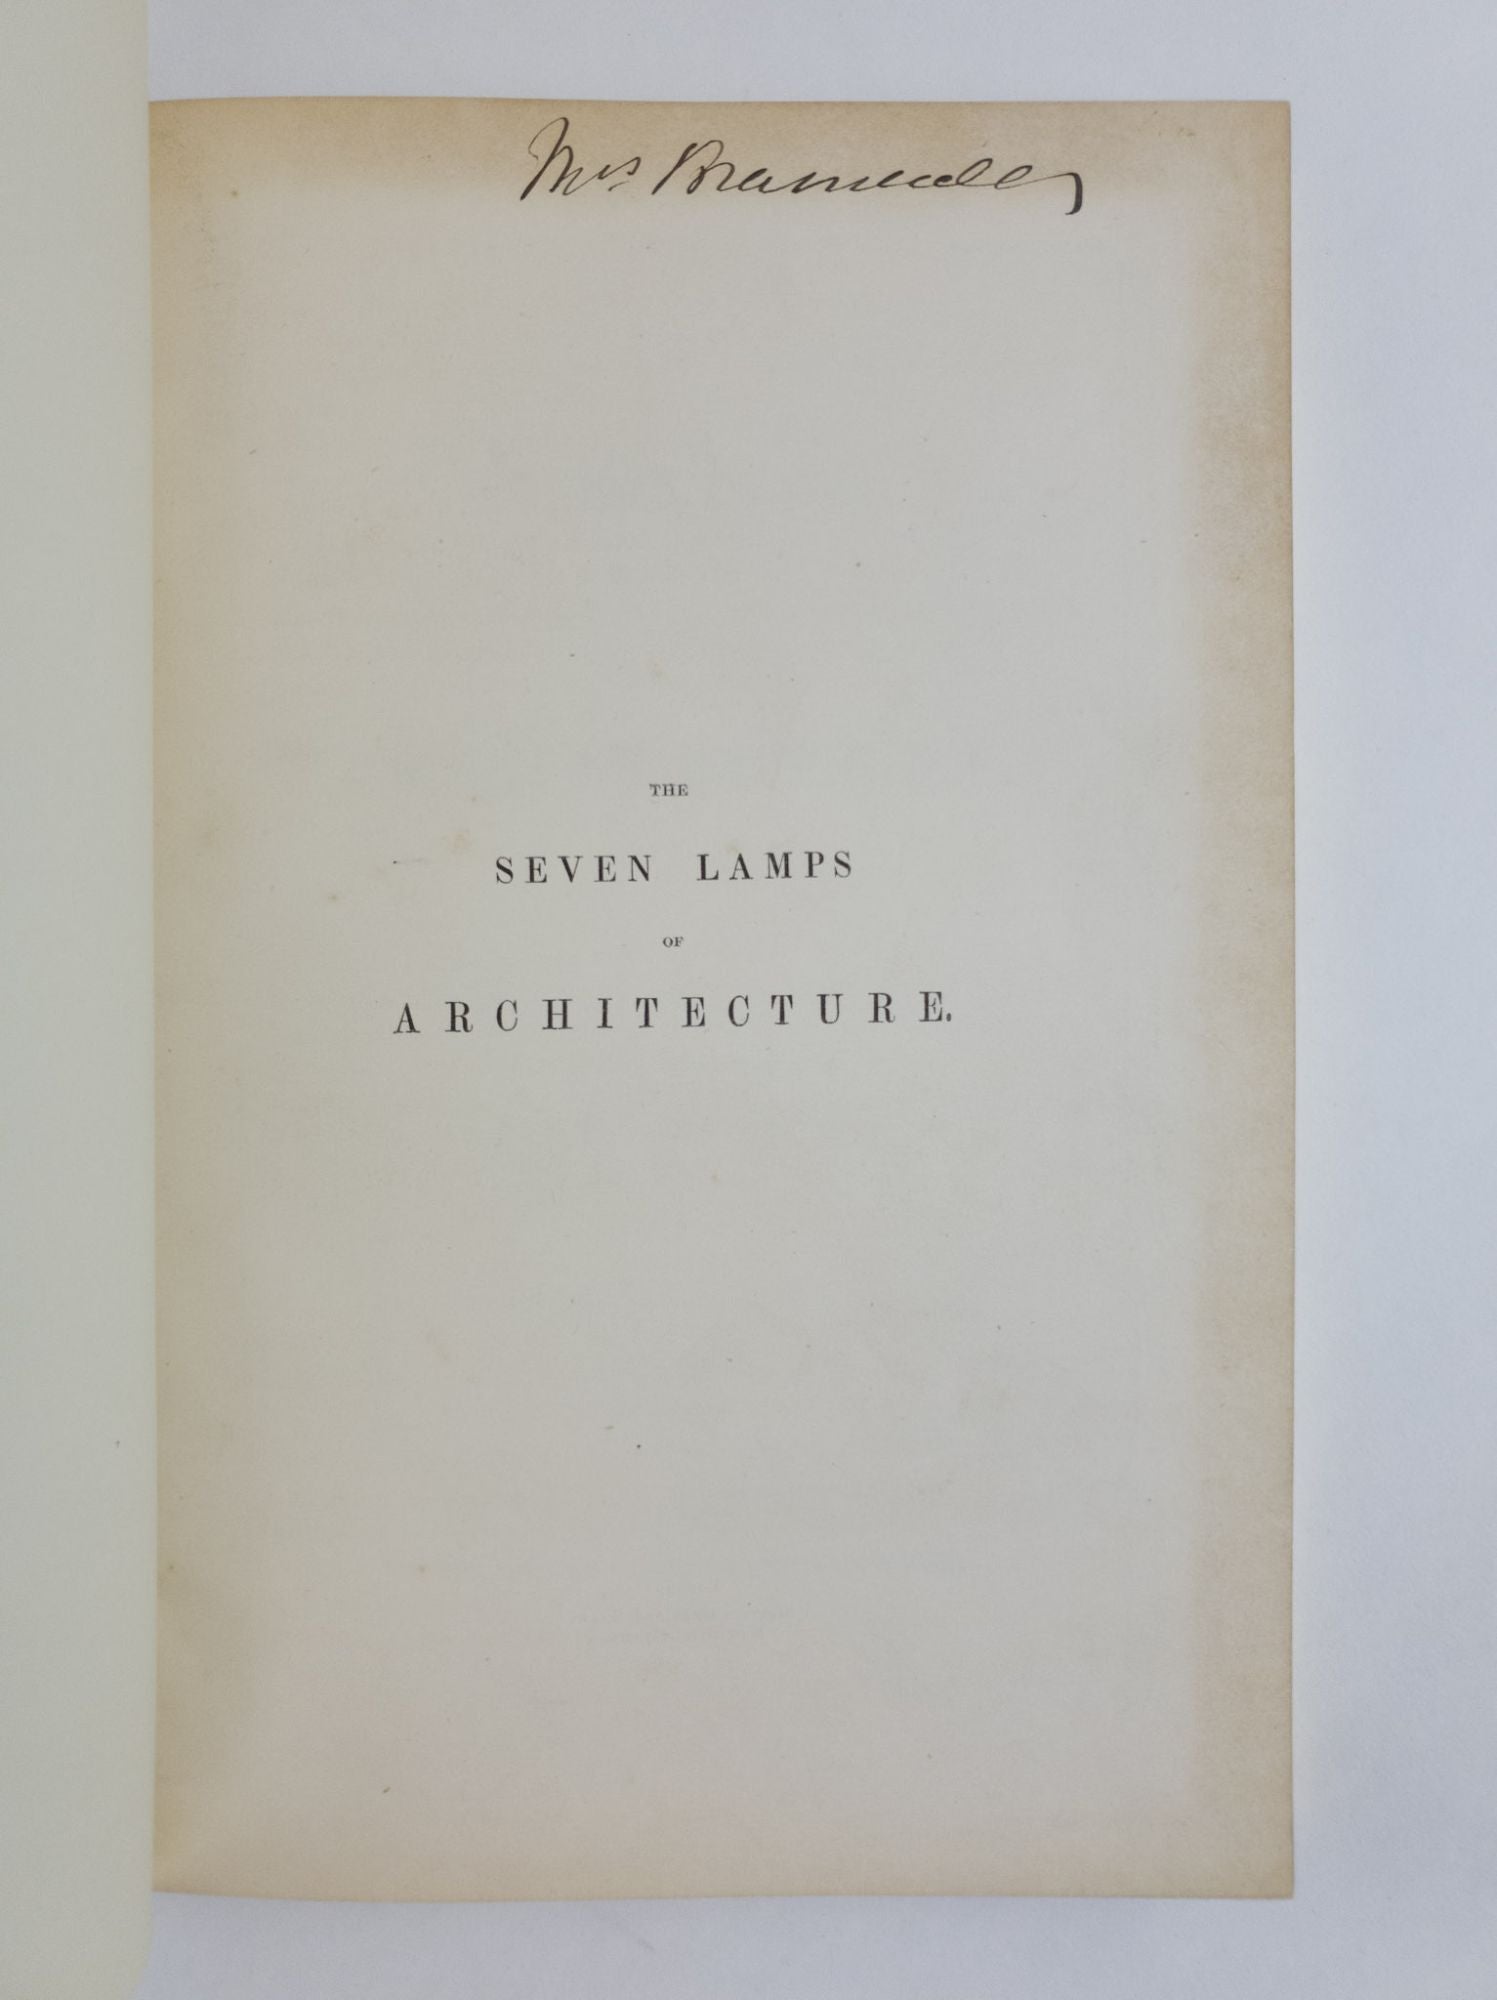 Product Image for THE SEVEN LAMPS OF ARCHITECTURE